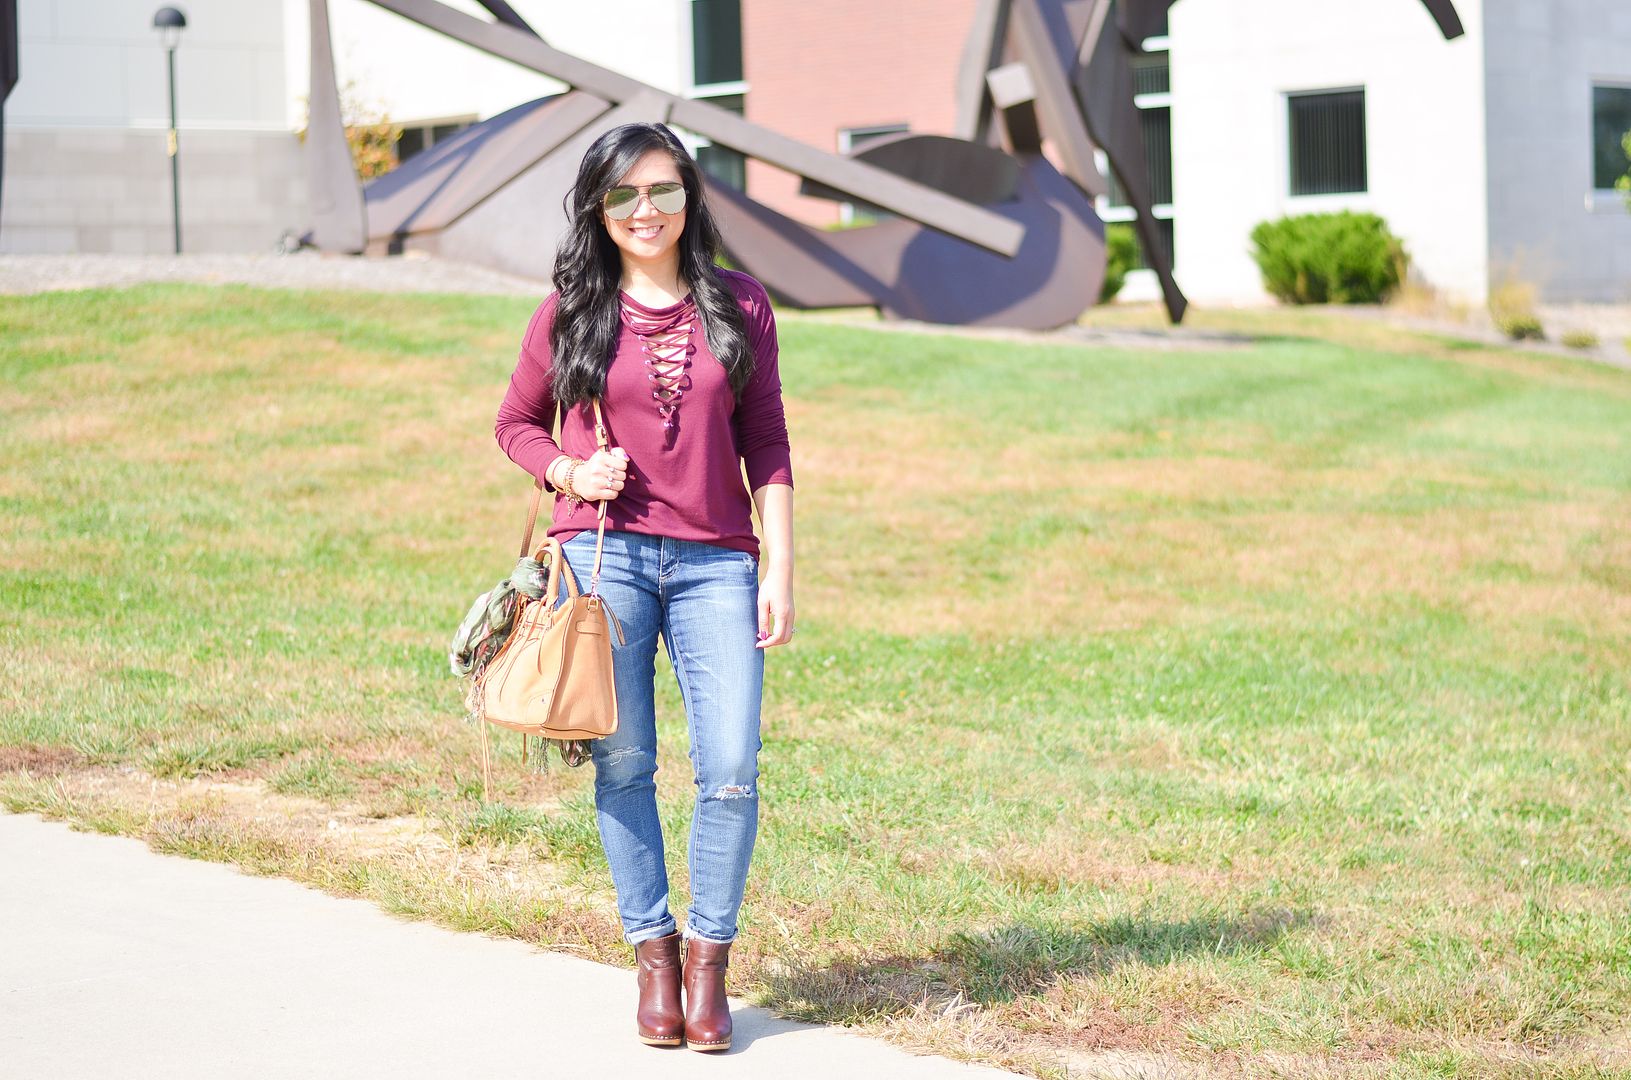 Express Lace up top outfit, trend